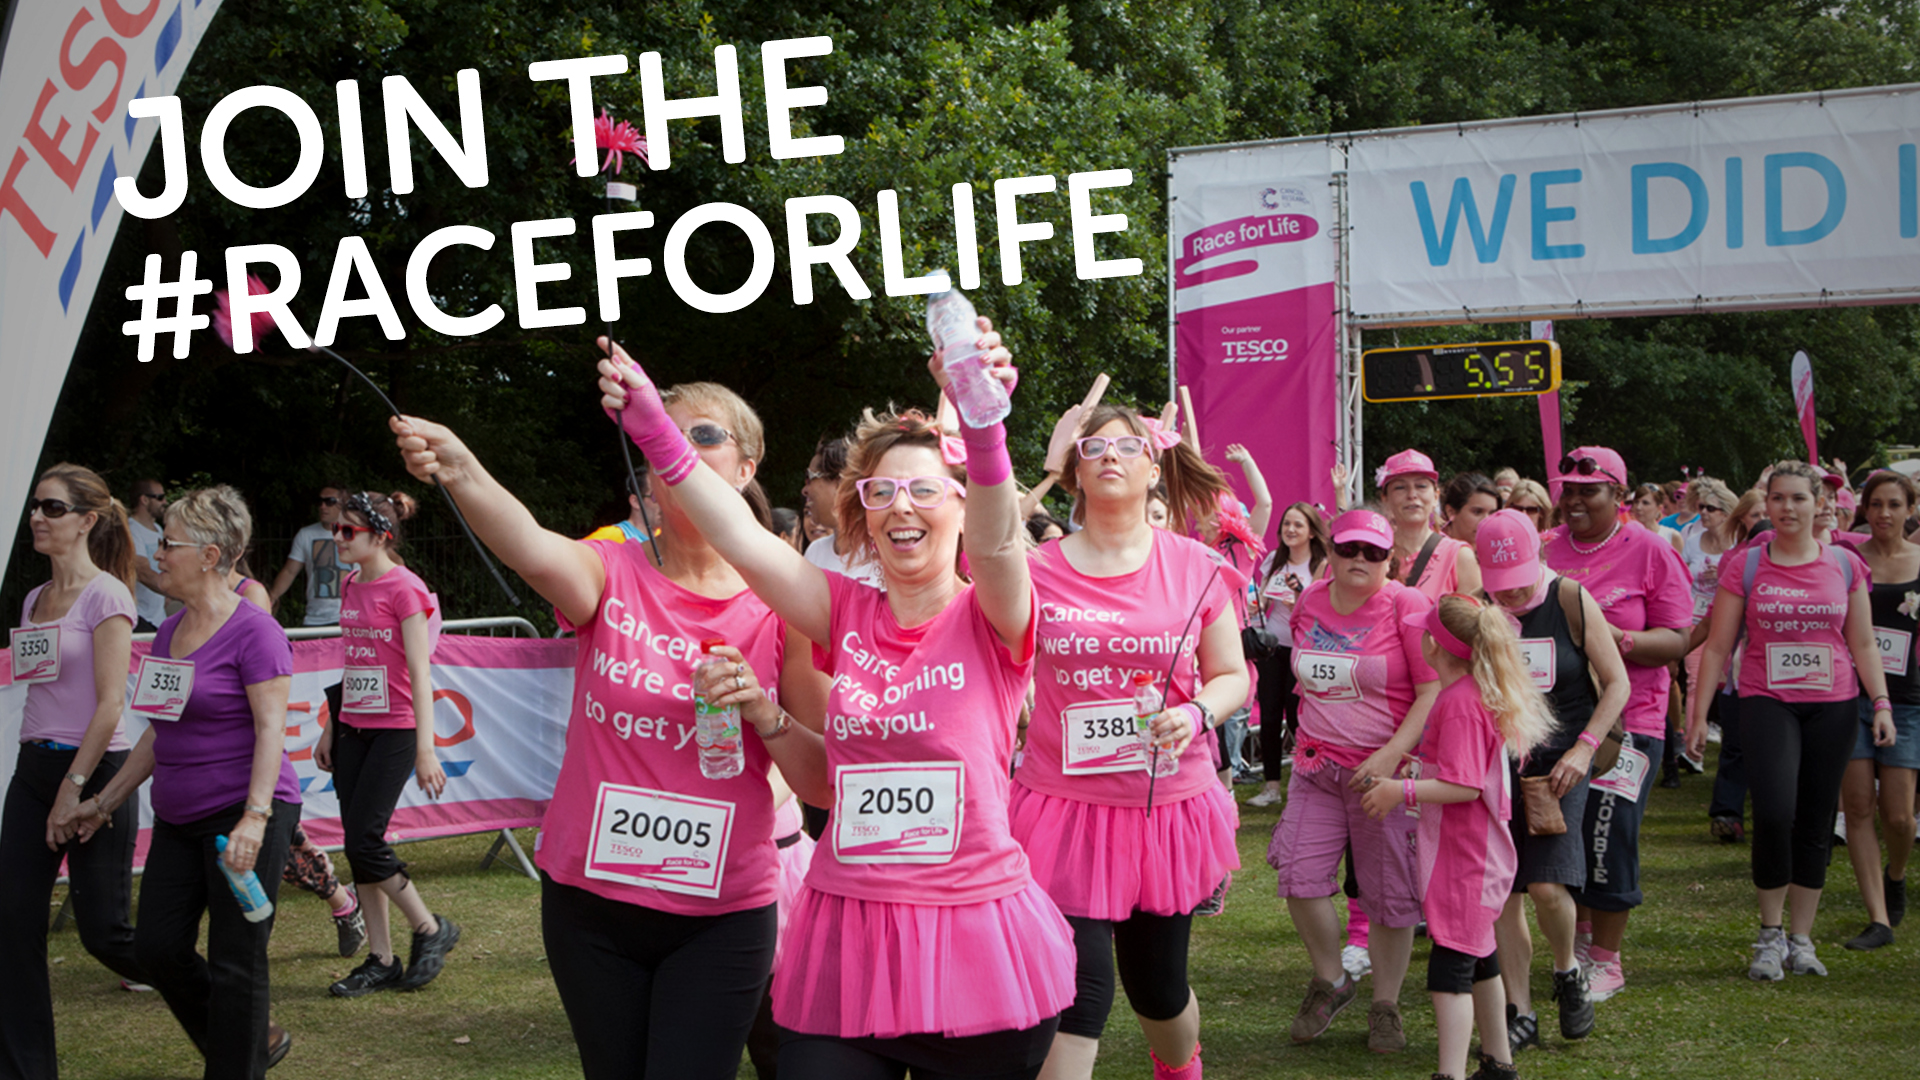 5K Race ARCHIVED RACE Race for Life Stockport Woodbank Memorial Park